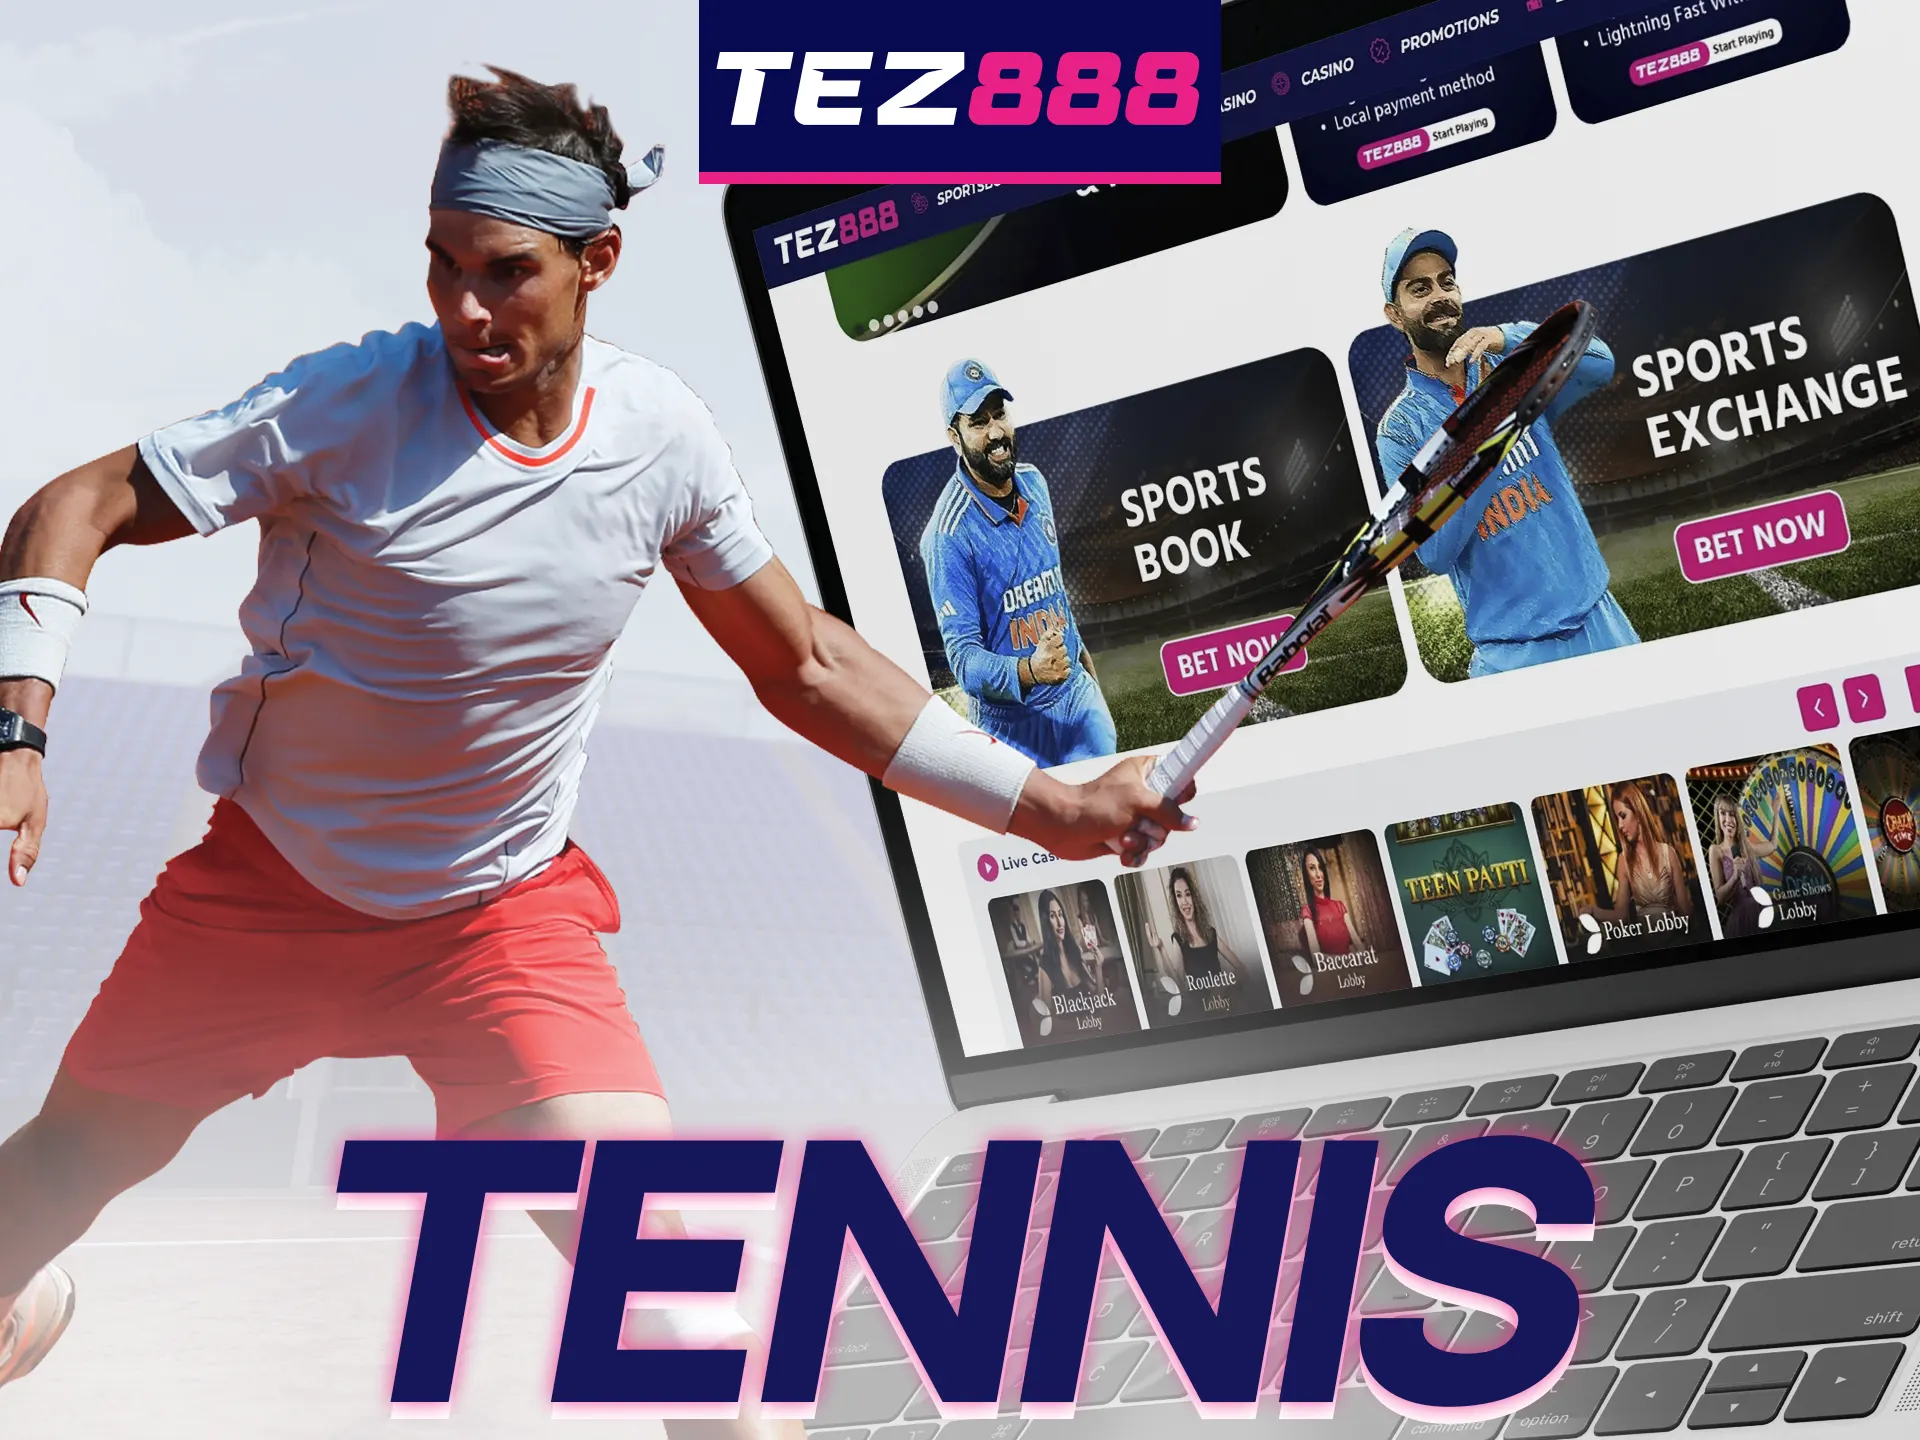 Place your bets on major tennis competitions with Tez888.